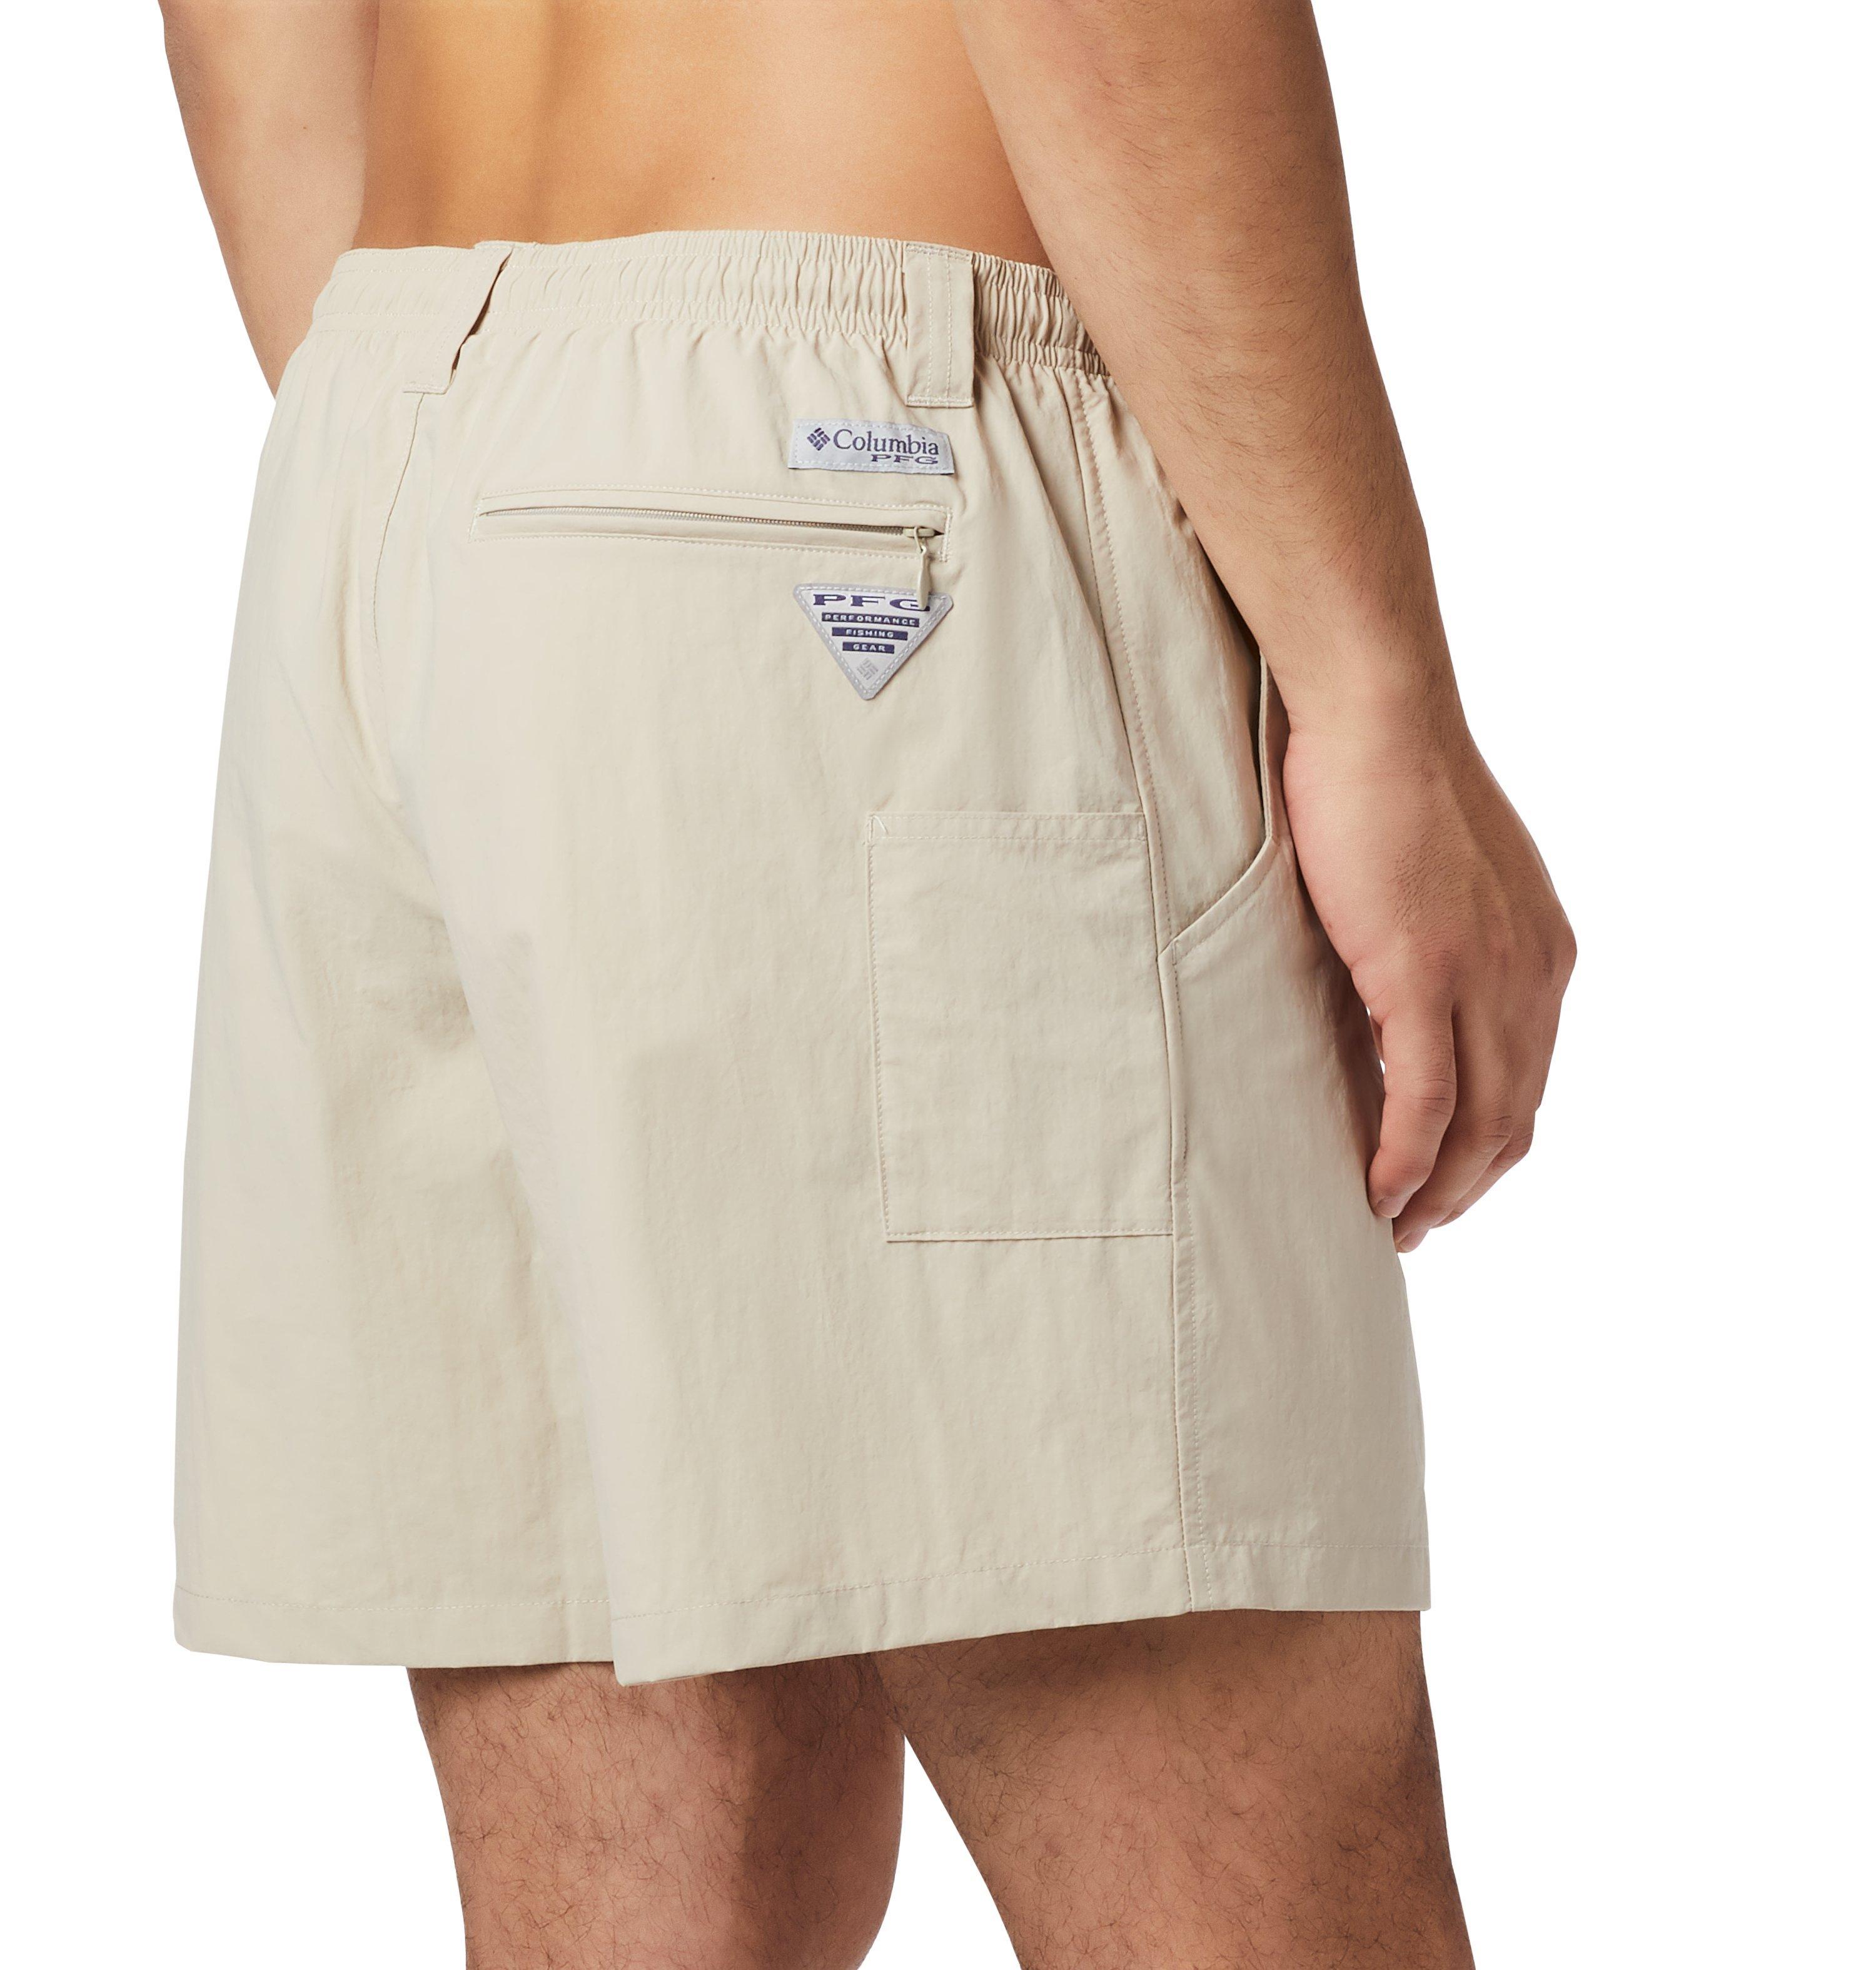 Columbia Men's PFG Backcast III Water Shorts, Large, Fossil